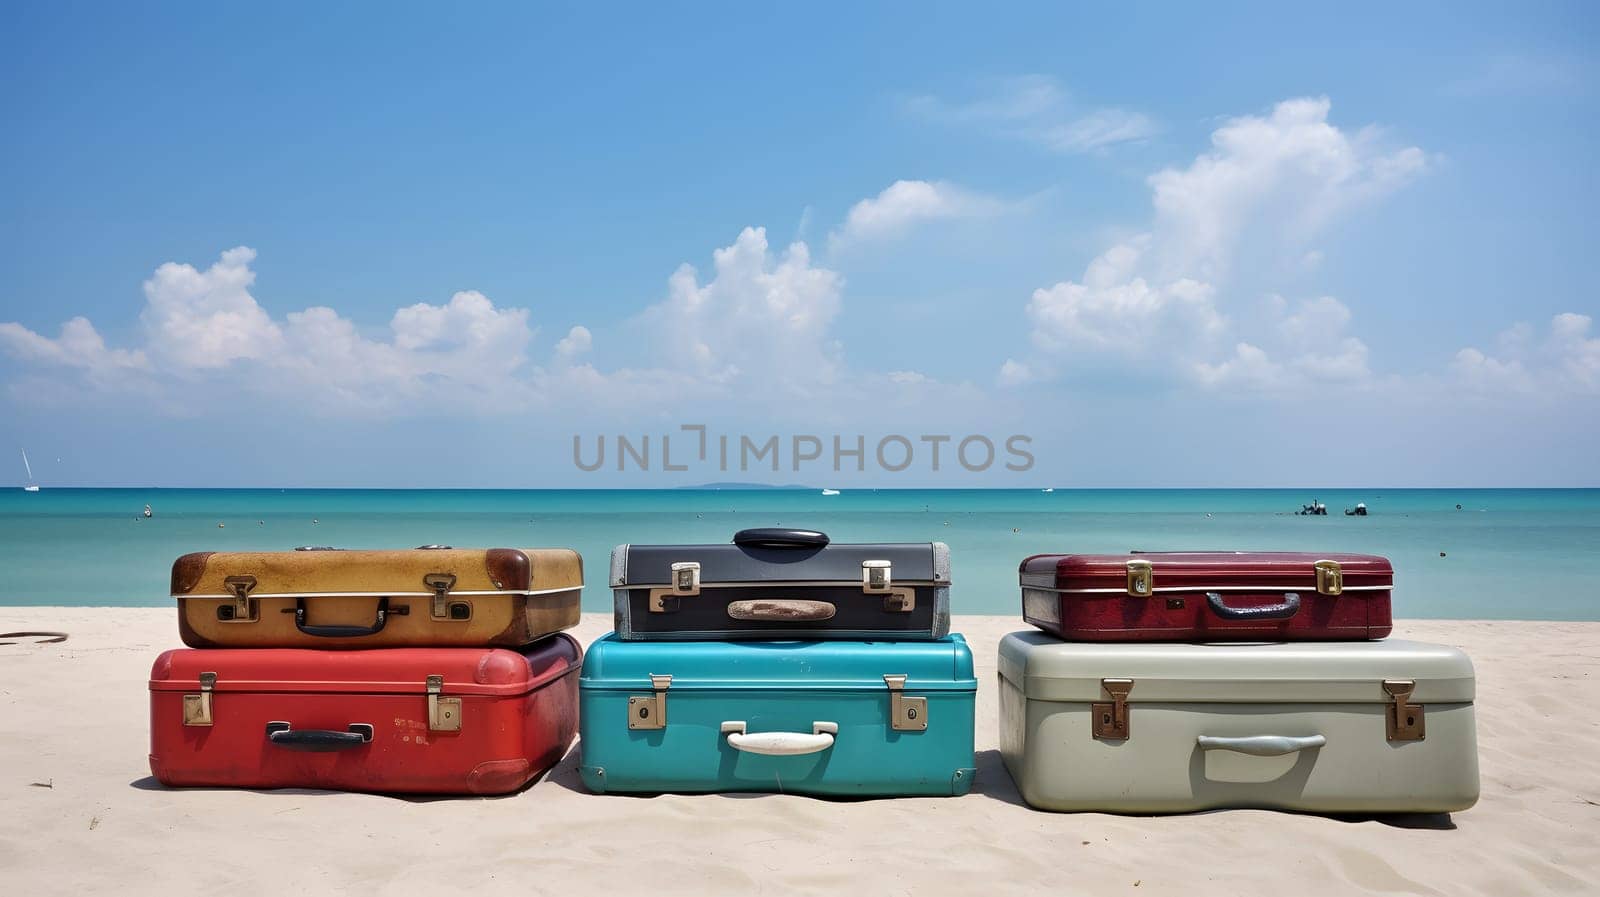 Few old-style leather or fiber suitcases laid on sand on sunny tropical beach, neural network generated art by z1b